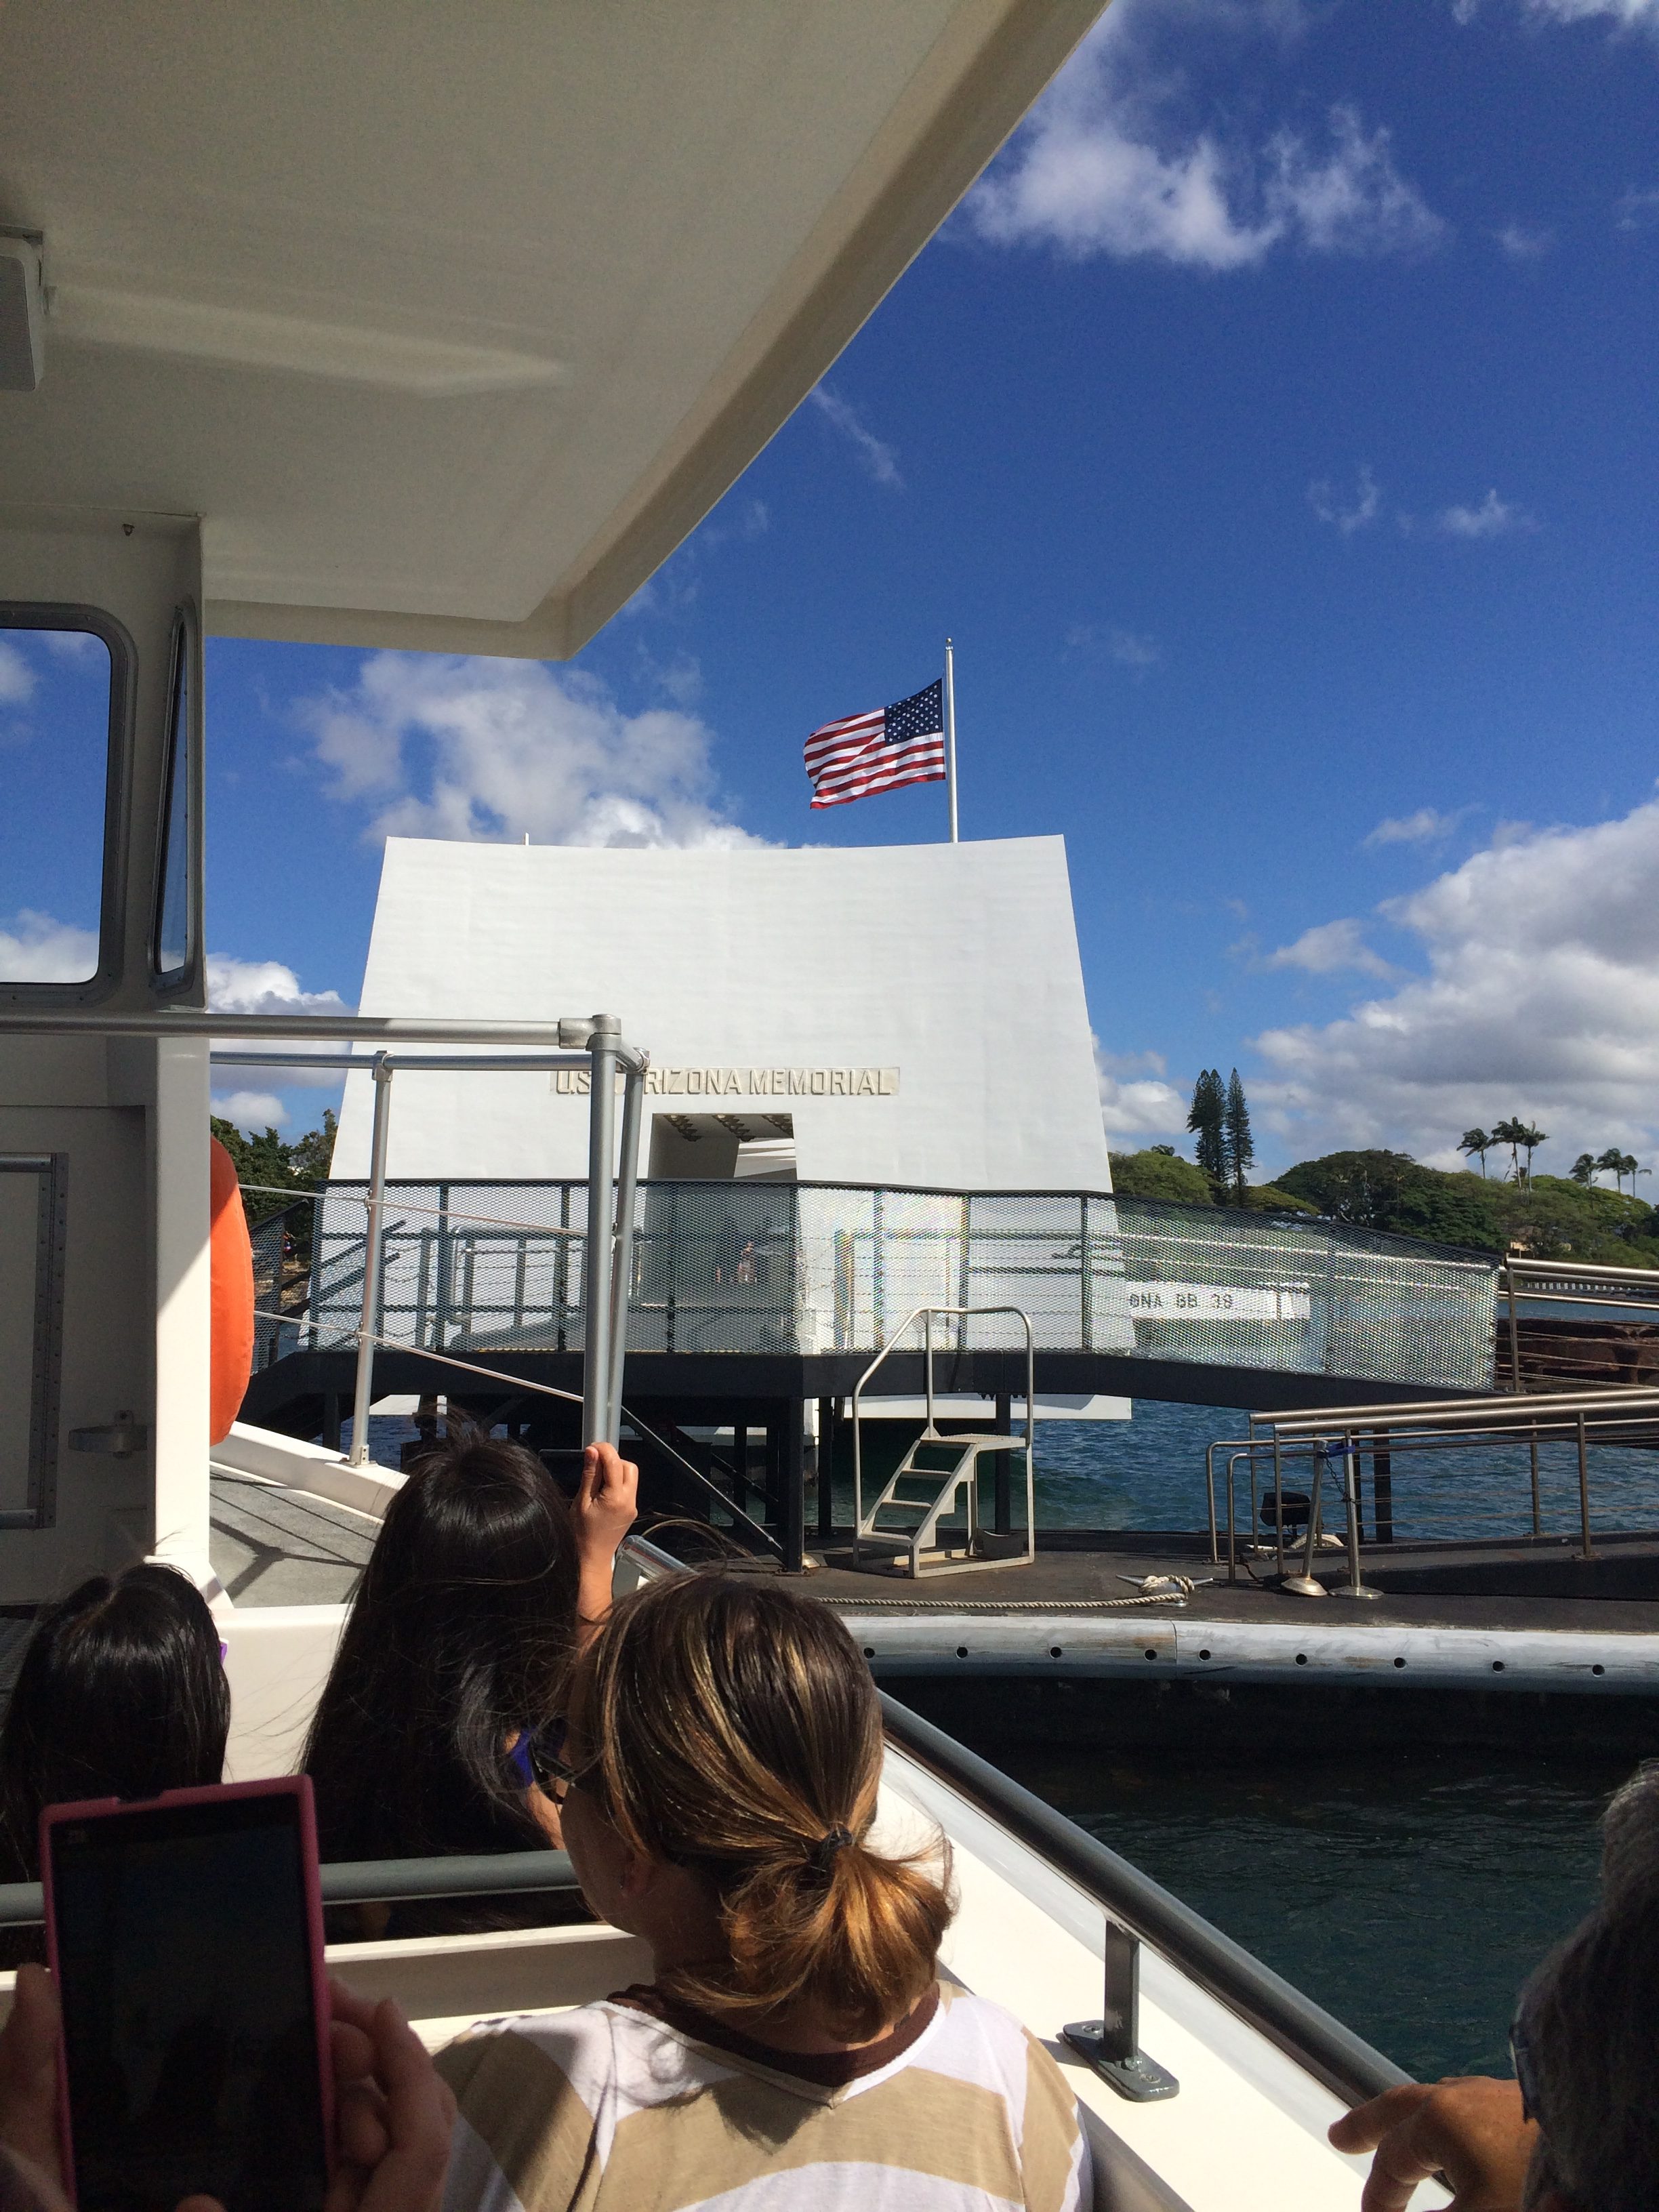 Arriving by boat at the USS Arizona Memorial